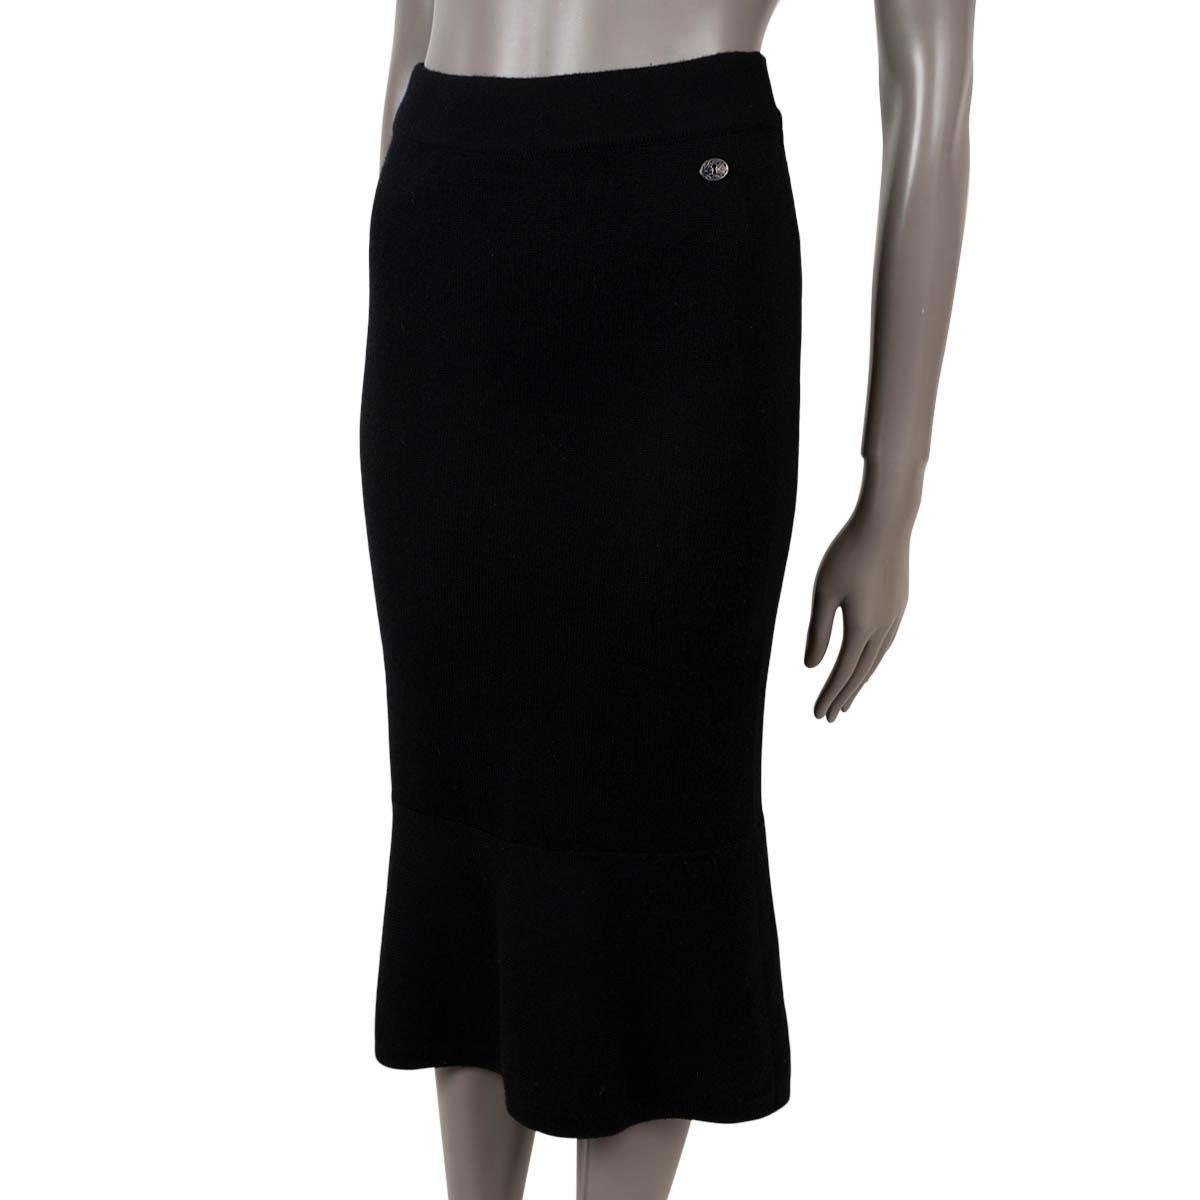 100% authentic Chanel knit midi skirt in black cashmere (100%). Features a flared hem, an enameled key hole button at the waist and an elastic waistband. Unlined. Has been worn and is in excellent condition. 

2017 Paris-Cosmopolite Metiers